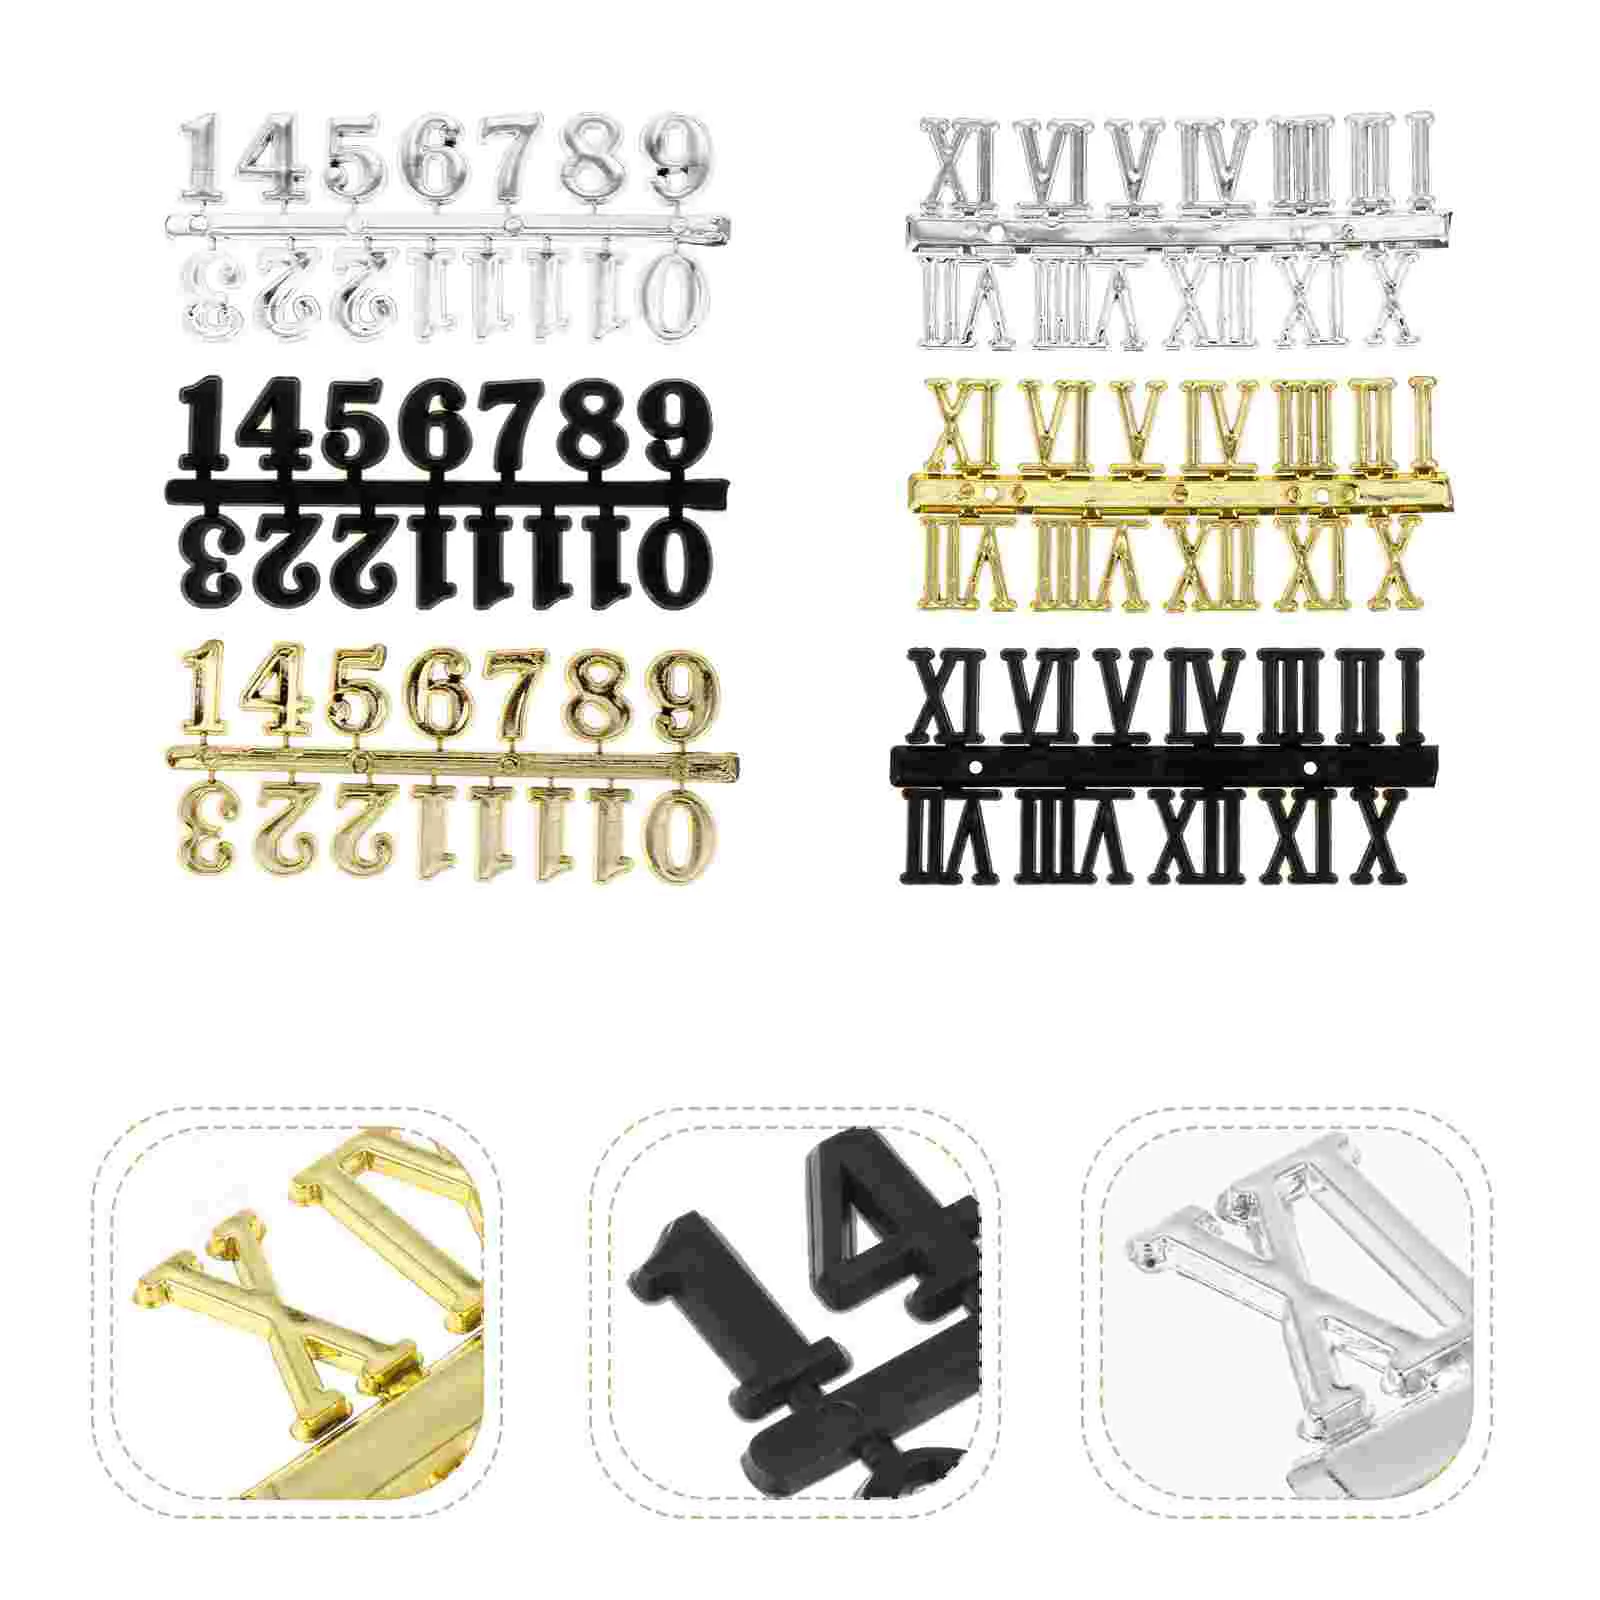 

6 Pcs Wall Clock Accessories Roman Number Replacement Digital Numbers Gold Letter Stickers DIY Reloj De Pared Numerals Crafts